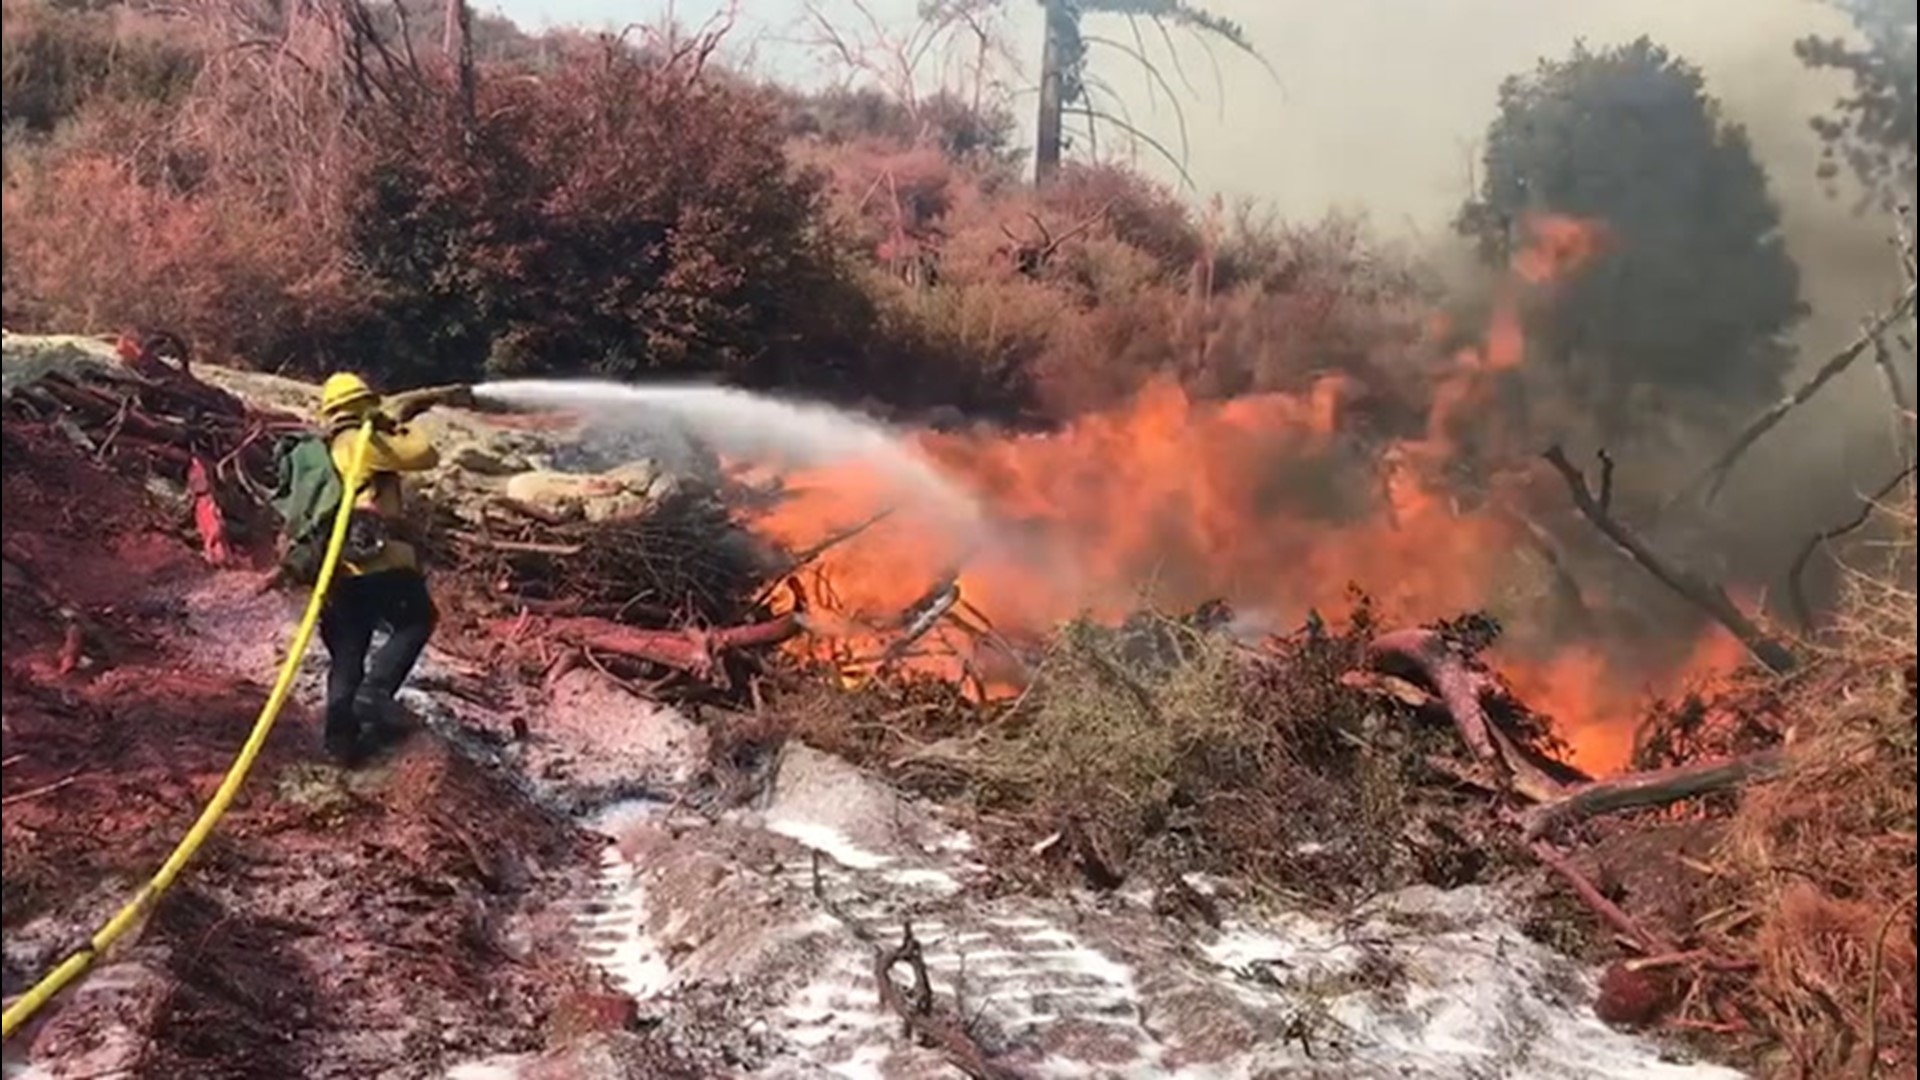 Officials with Angeles National Forest, site of the massive Bobcat Fire, said the 114,000-acre wildfire had reached 50% containment on Sept. 24. The fire has been burning since early September.